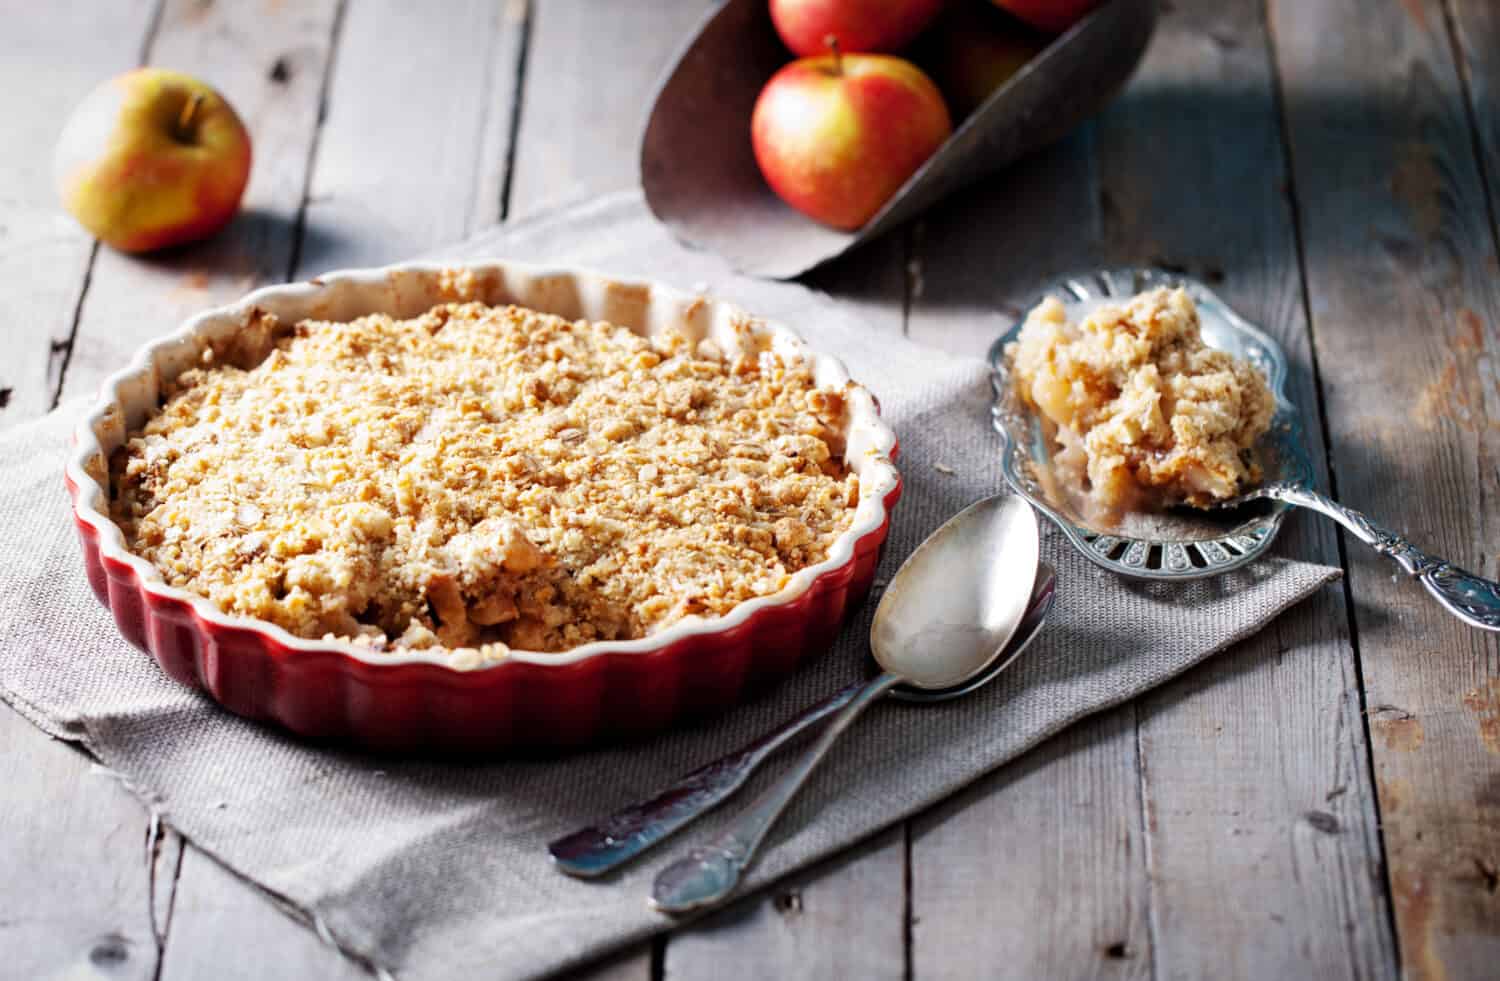 Apple crumble on the wooden background with apples .